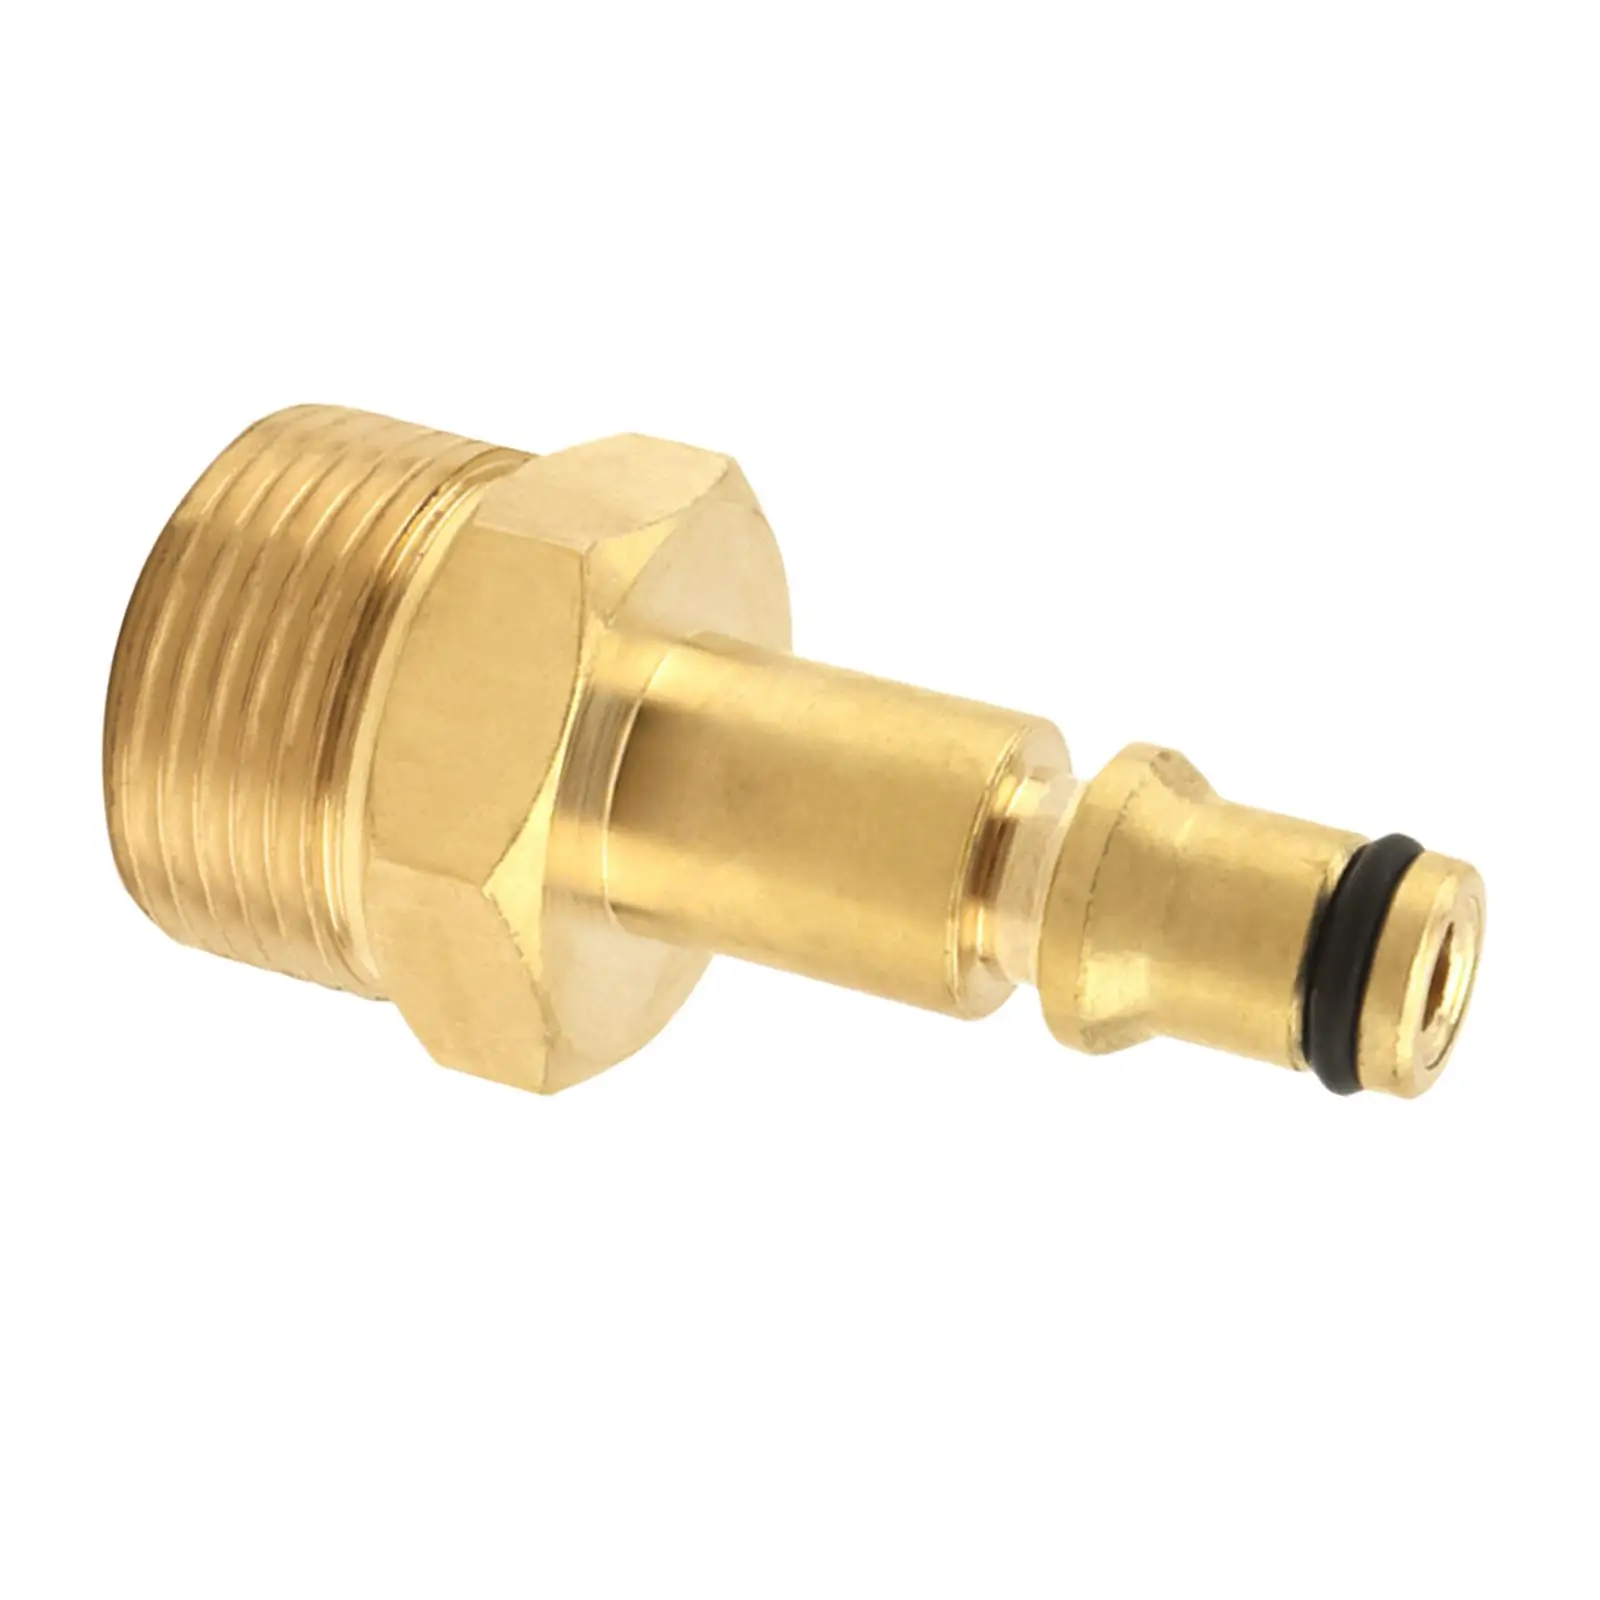 Hose Adapter Brass Fittings Hose Repair Kit Convert Joint Cleaning Kit for Yili Long Pressure Washer Household Car Wash